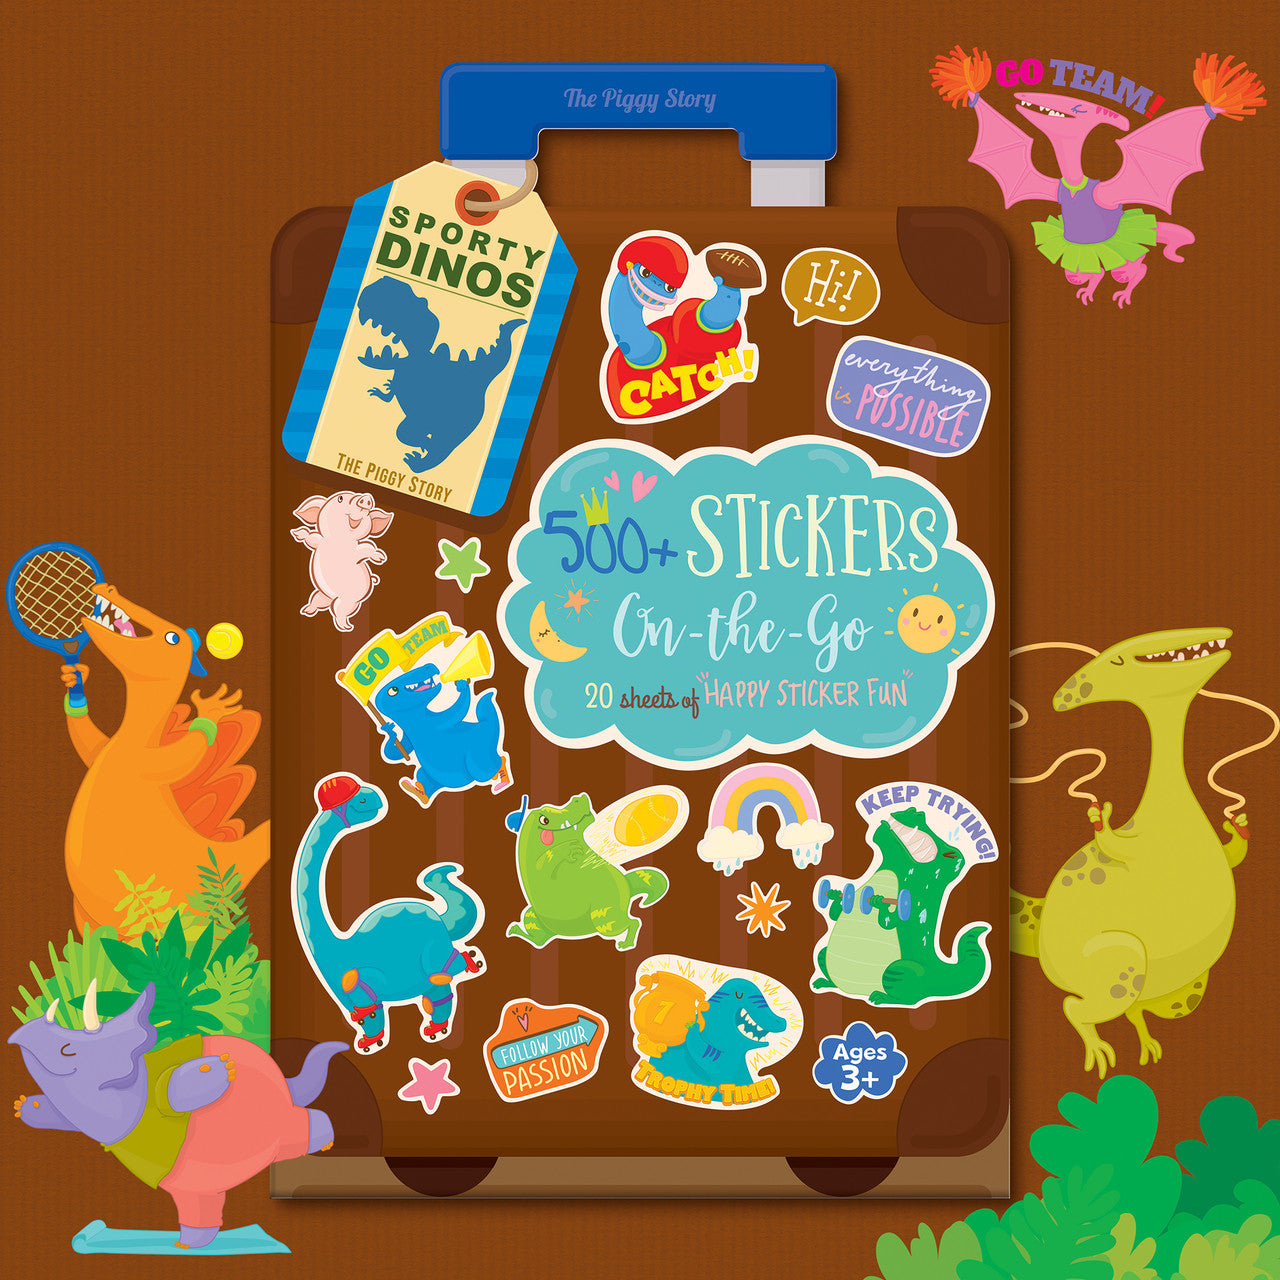 The Piggy Story 500+ Stickers On-the-Go Sporty Dinos